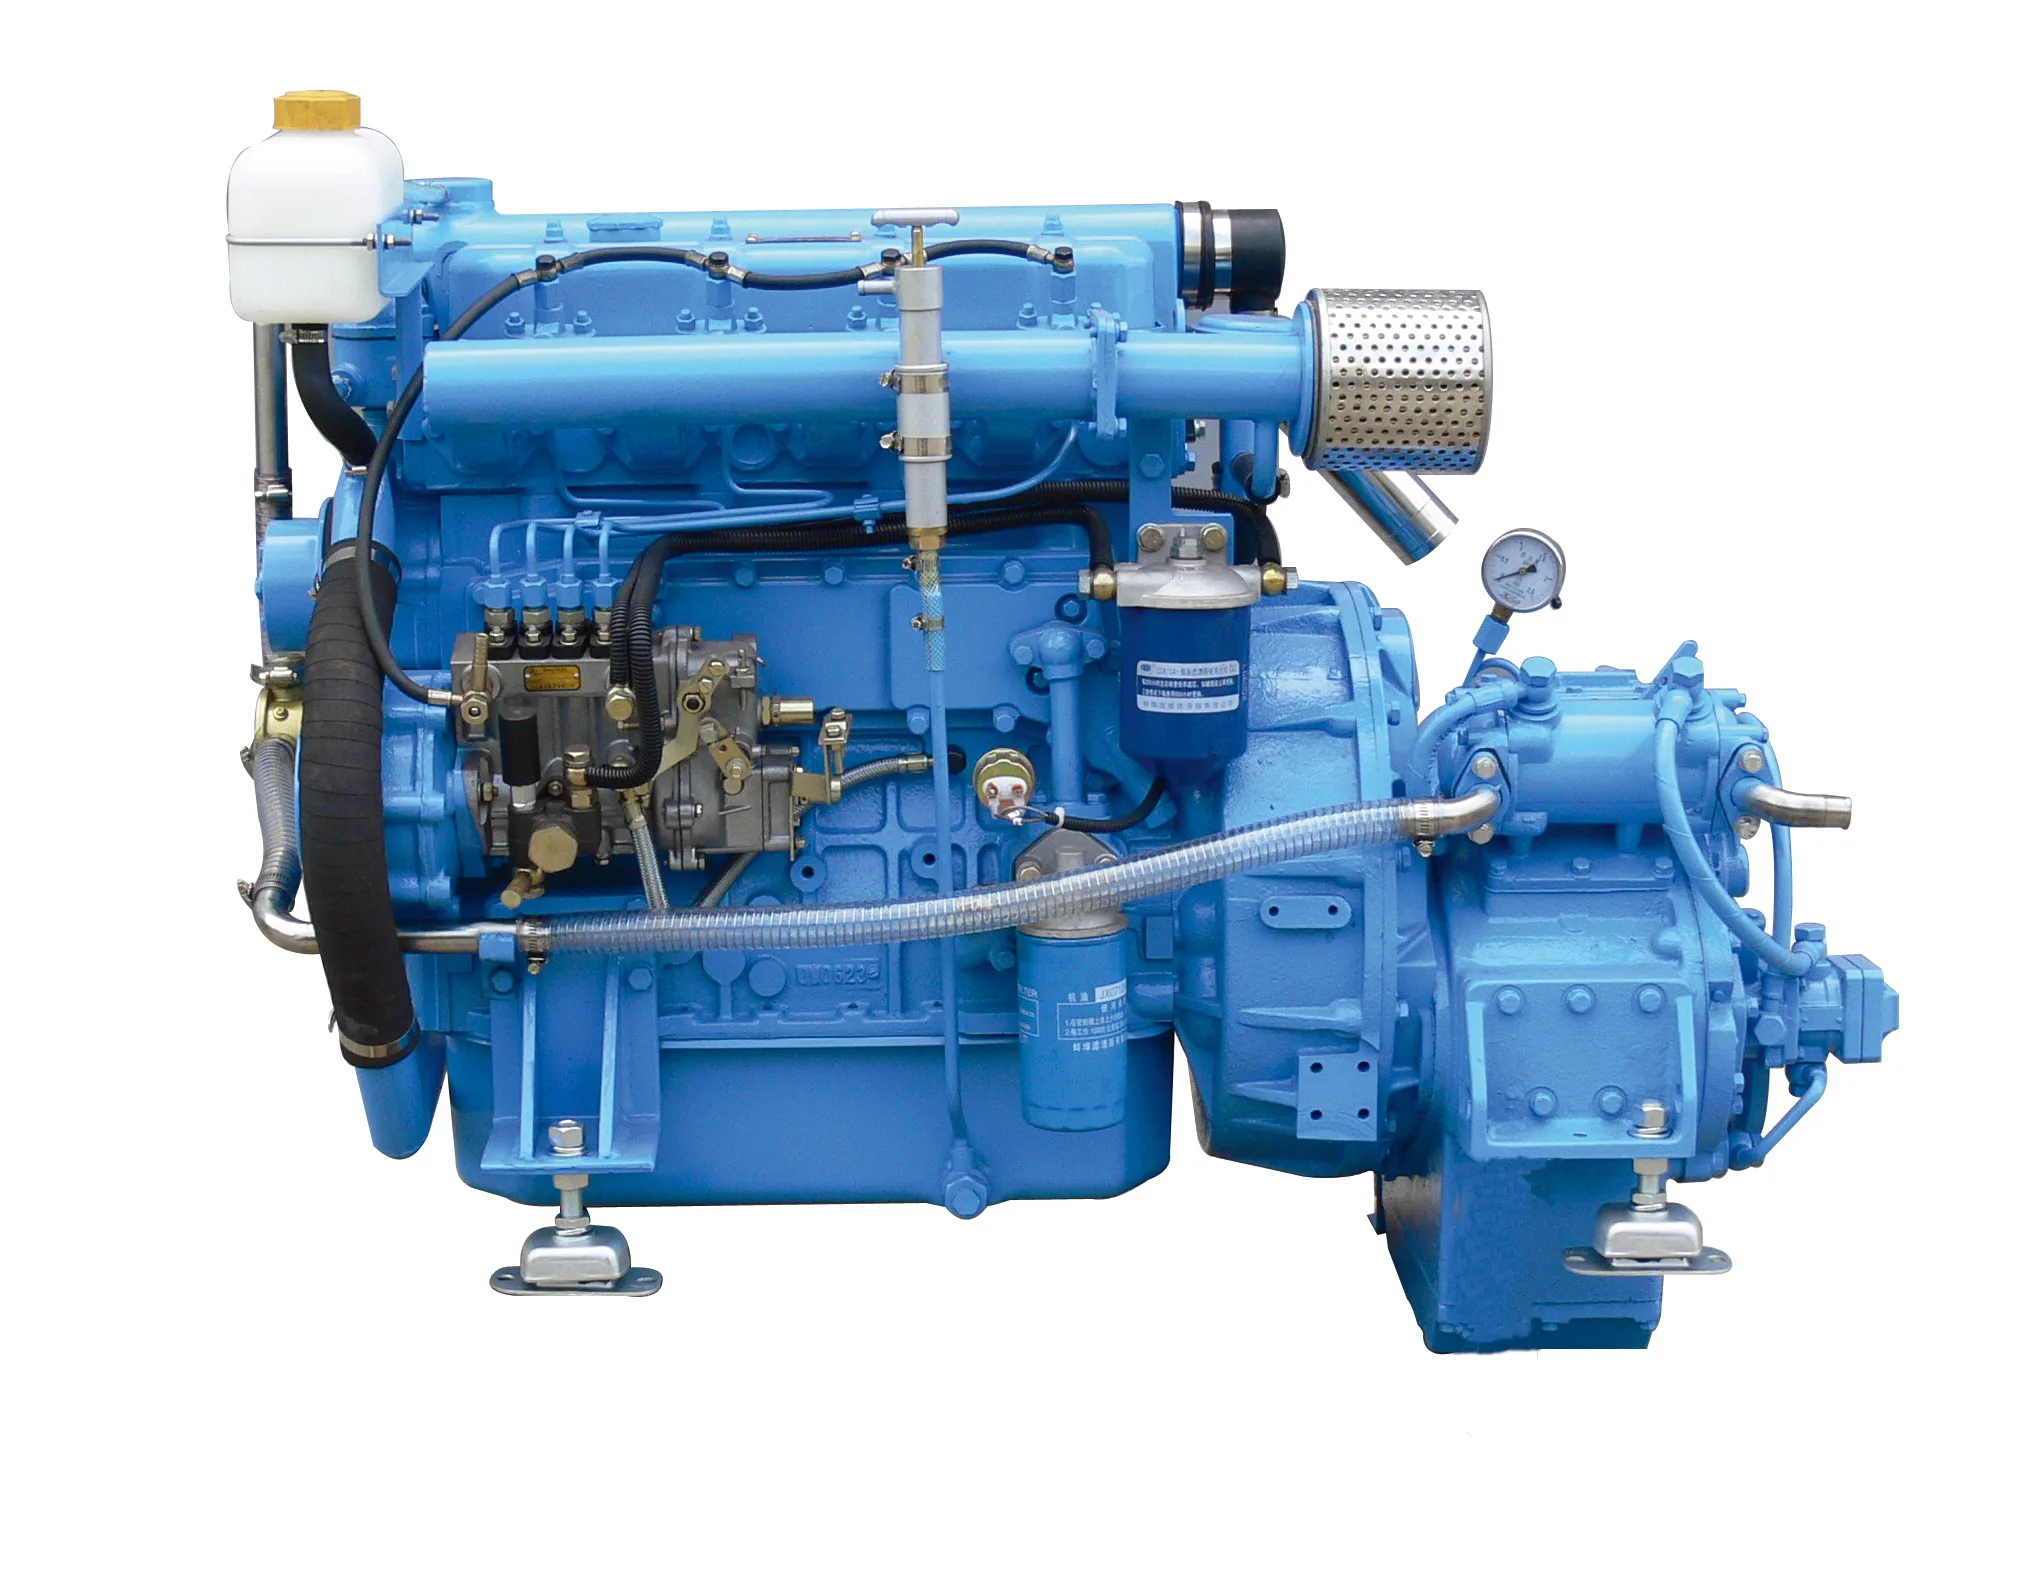 Marine Diesel Engine Tdme 4102 4 Cylinder 70hp Power With Boat Gearbox